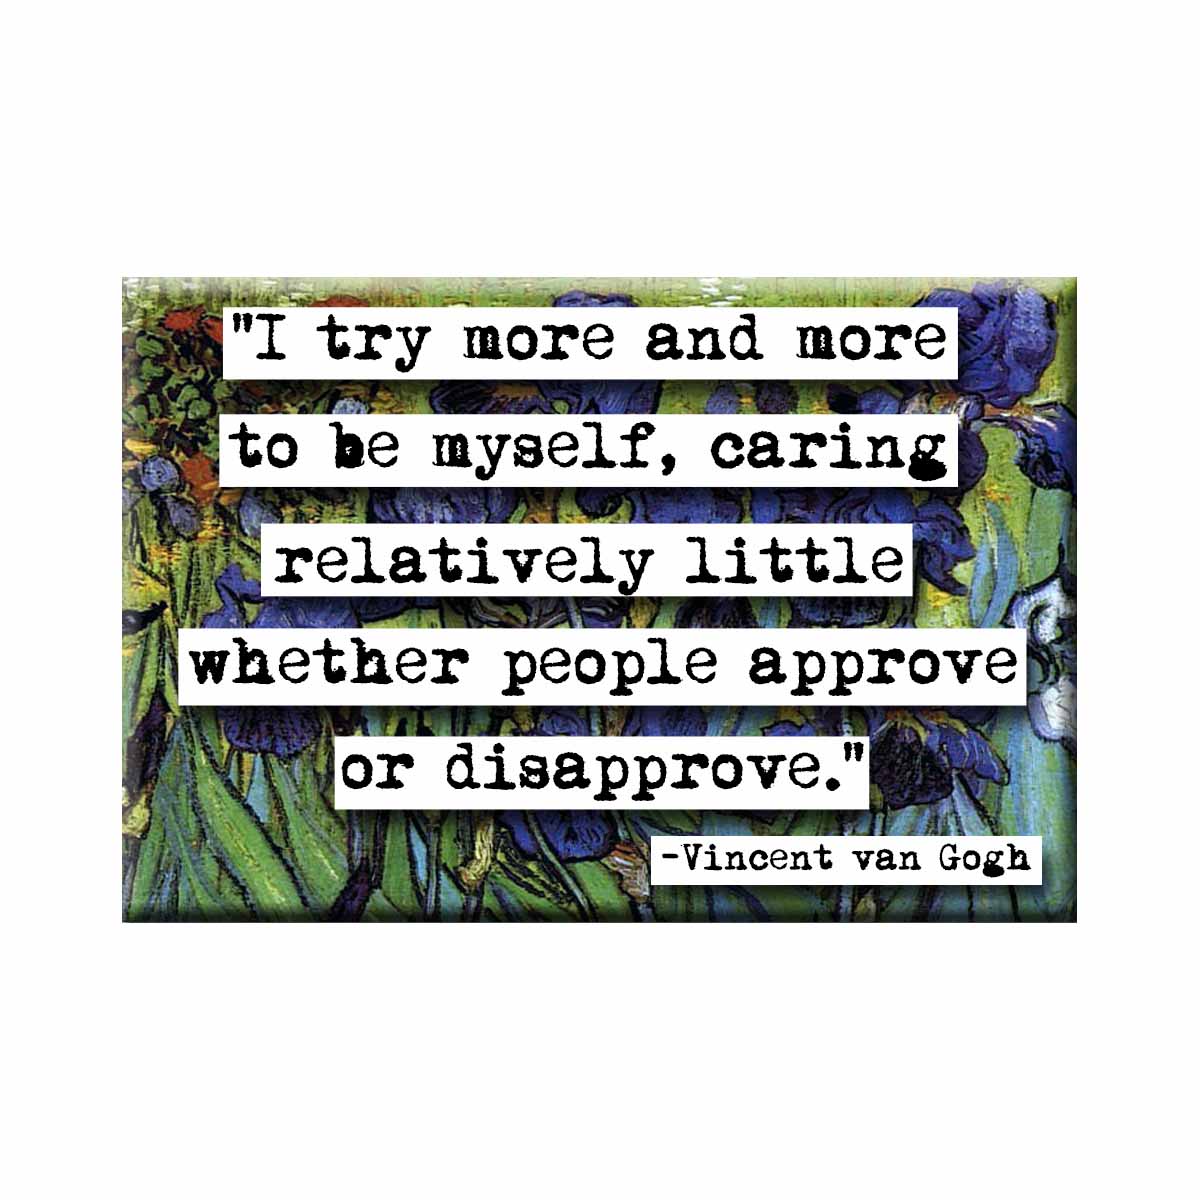 Vincent van Gogh Approve or Disapprove Quote Refrigerator Magnet (no.564)